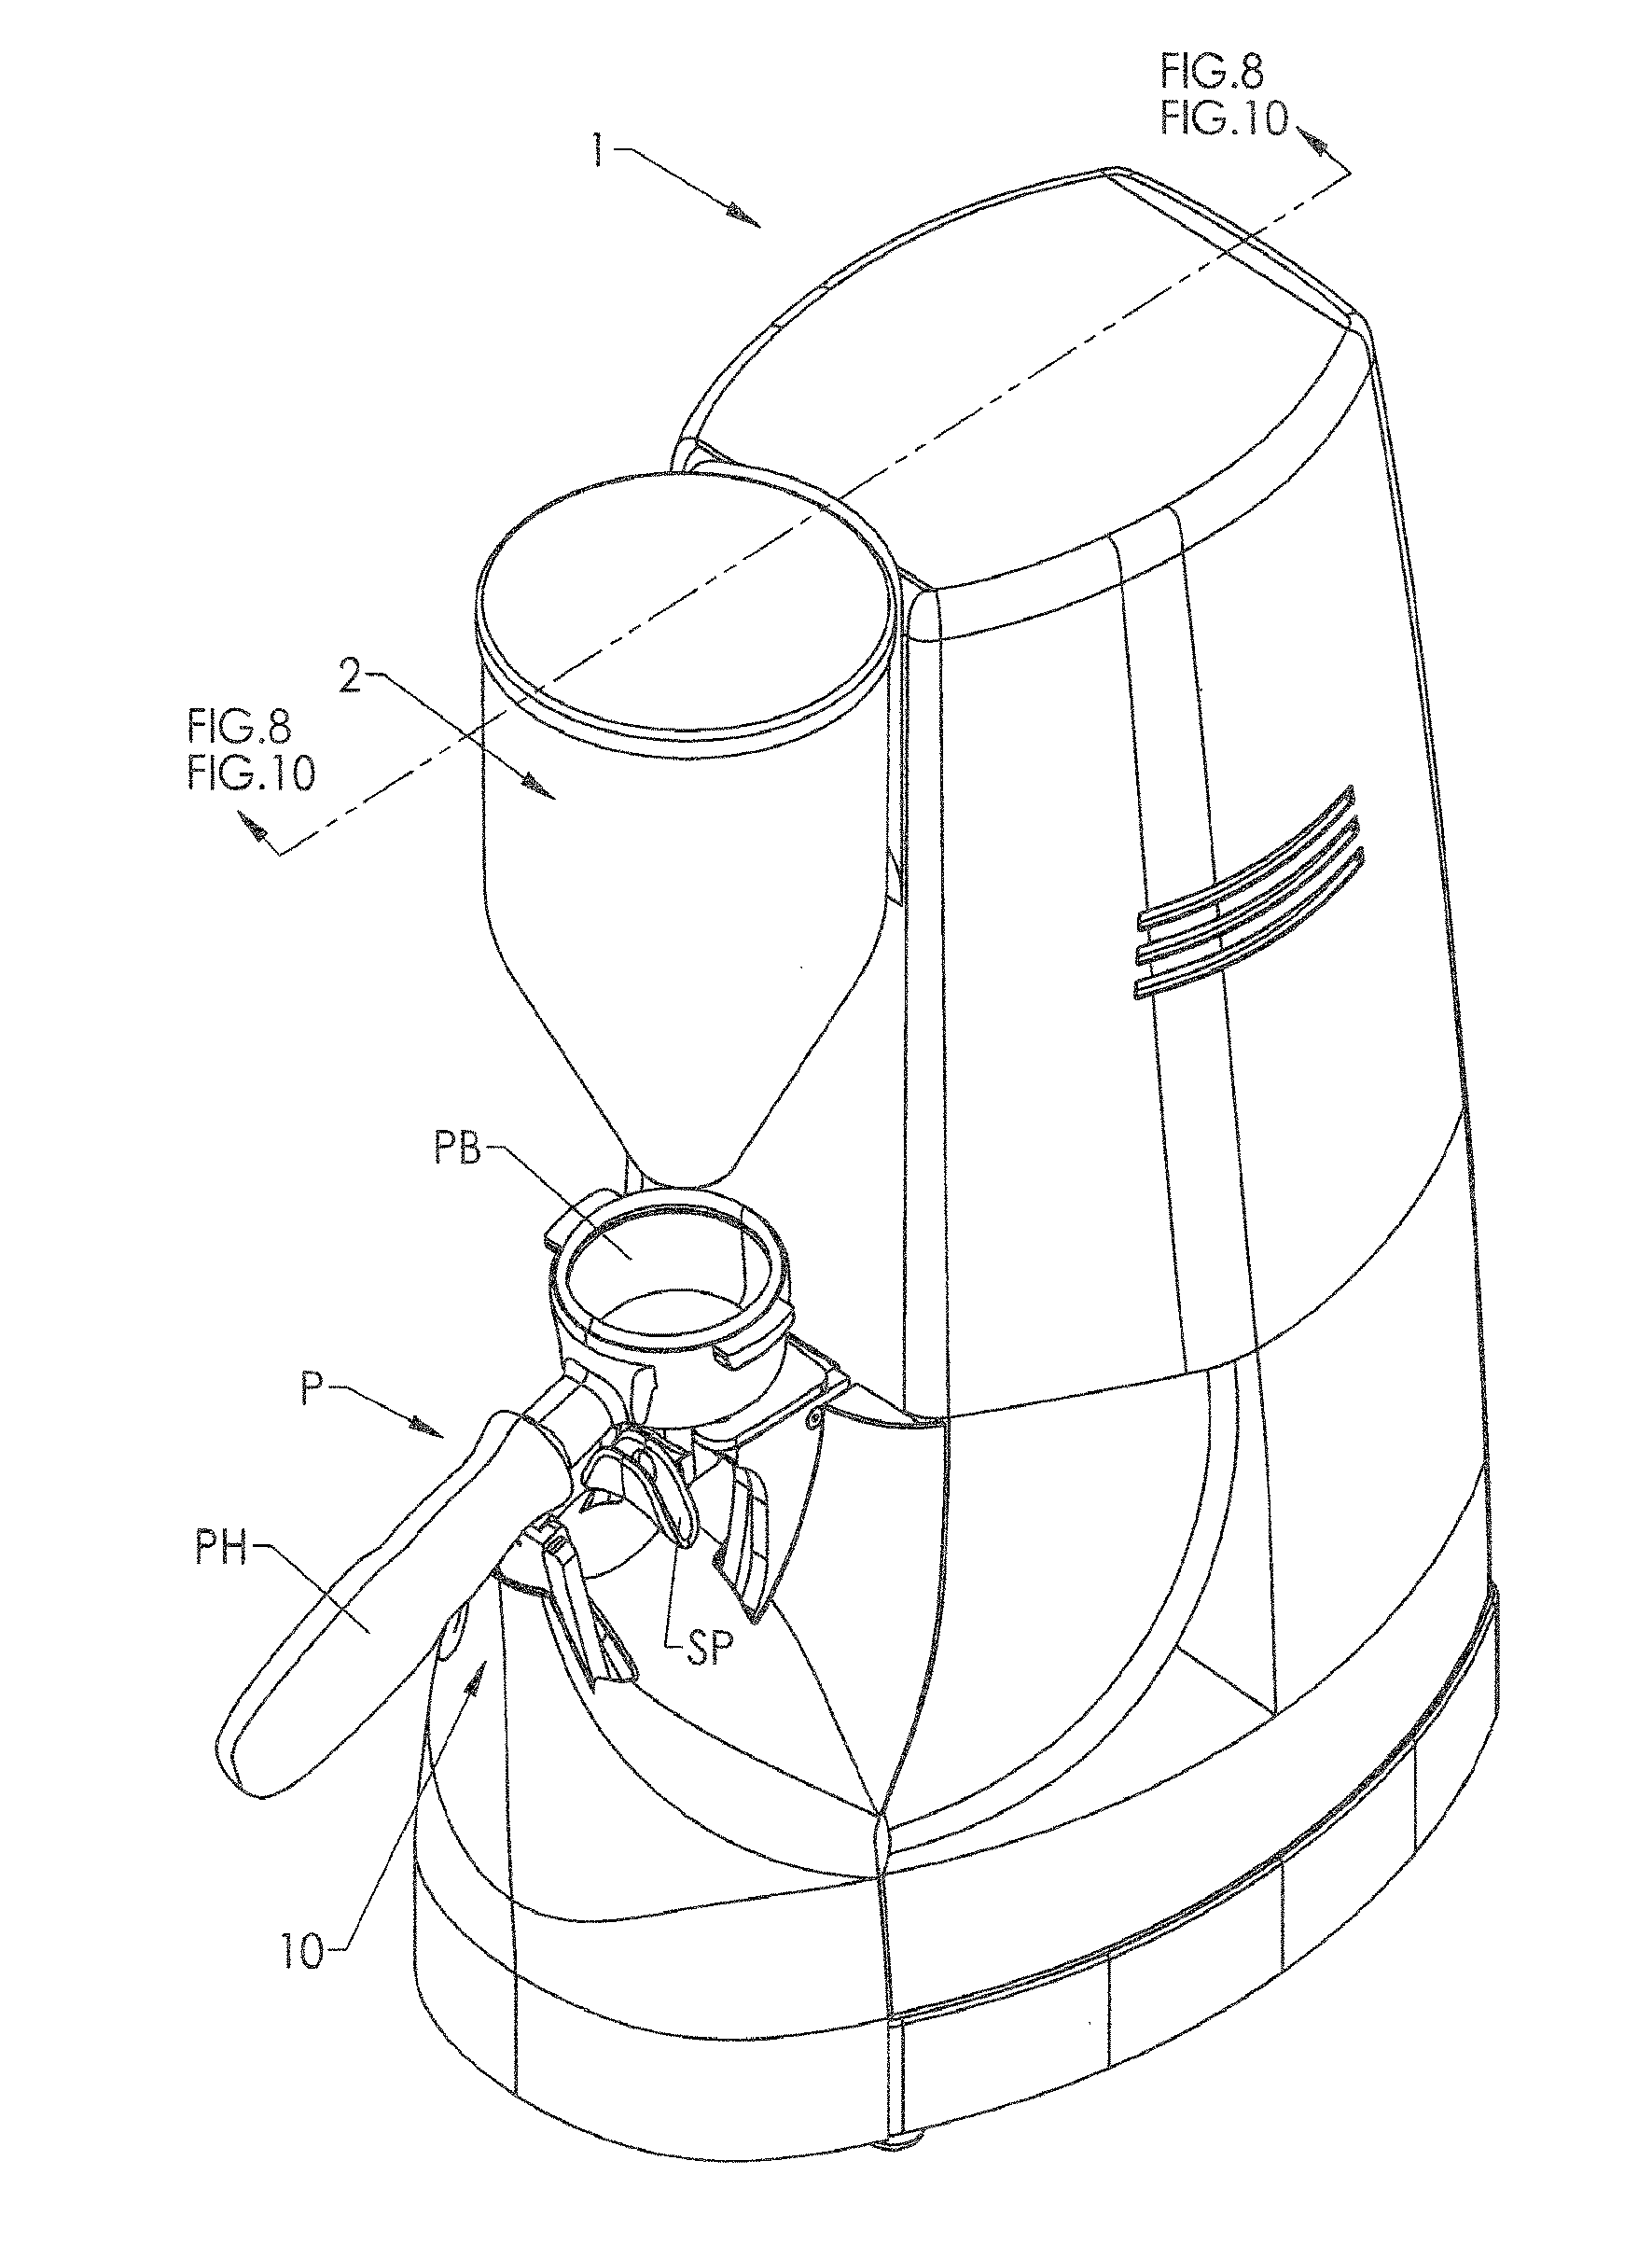 Portafilter and grounds weighing platform system and methods of use